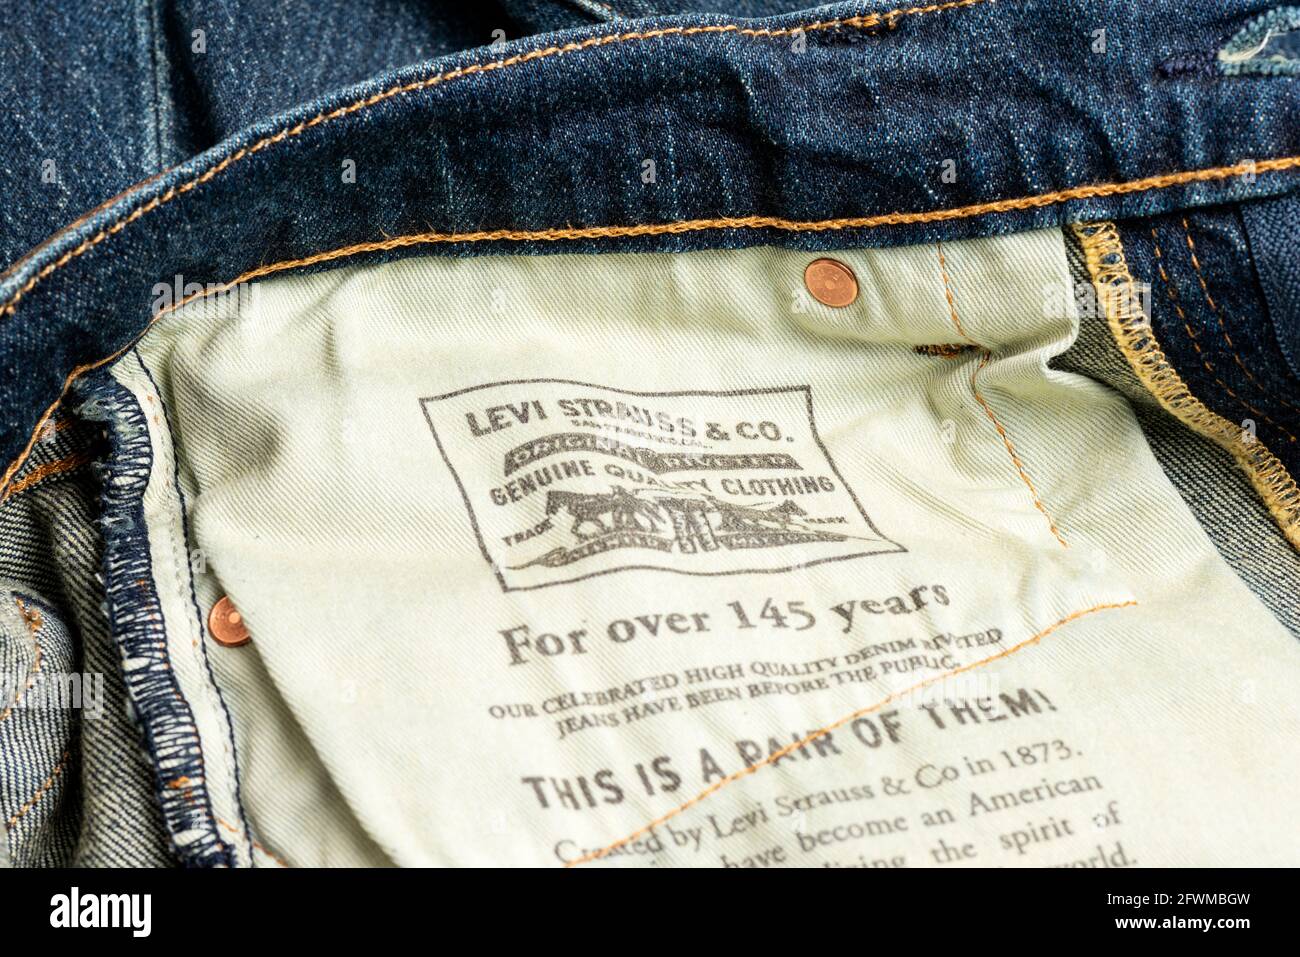 Levi's pair of jeans inside text and label Stock Photo